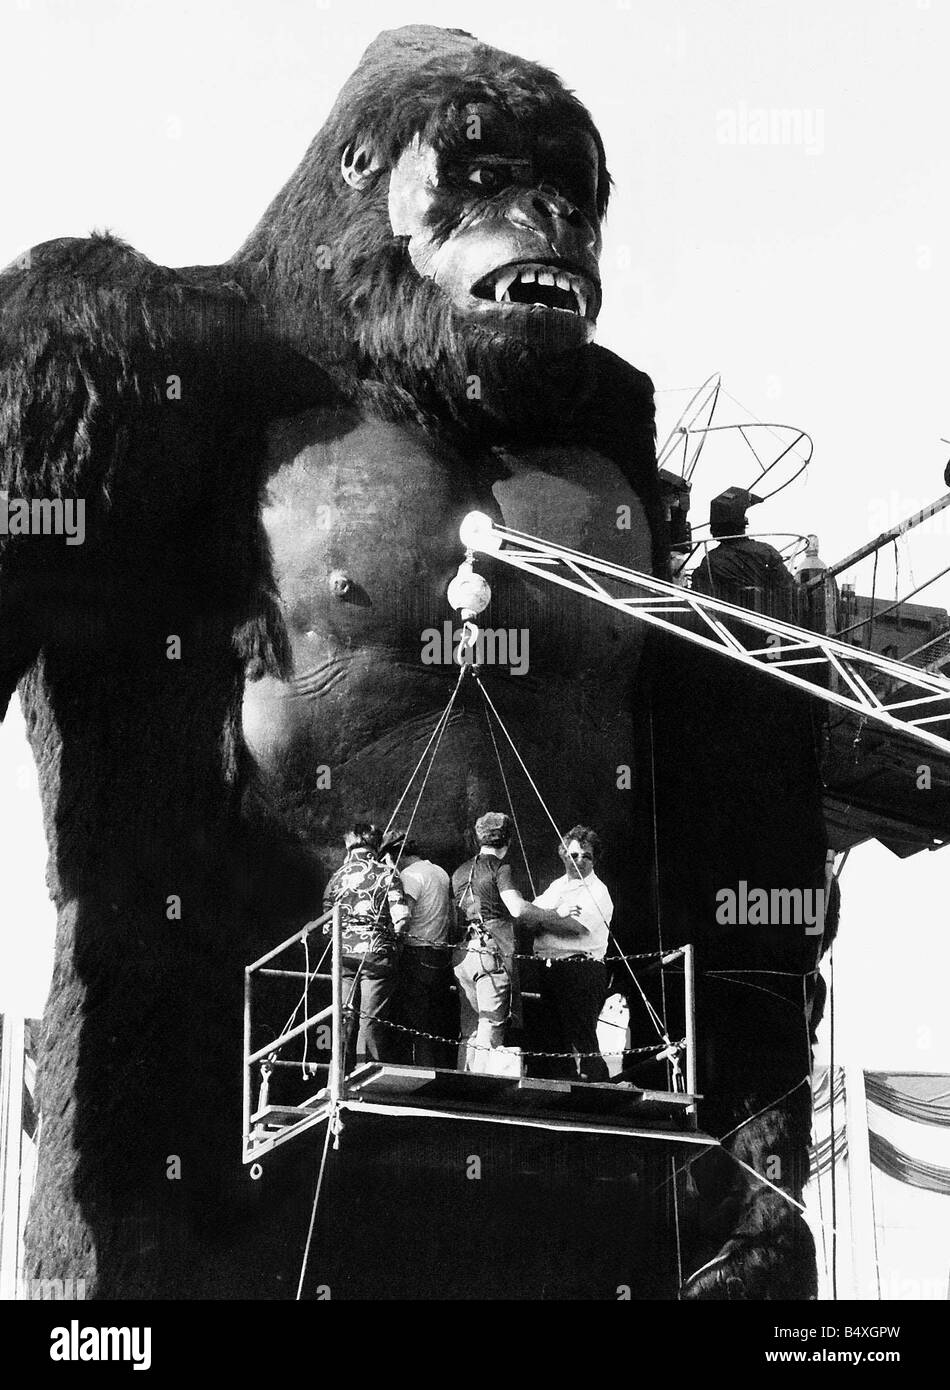 King Kong the sixty feet mechanical model and major star of the film King Kong in the middle of filming a scene Stock Photo